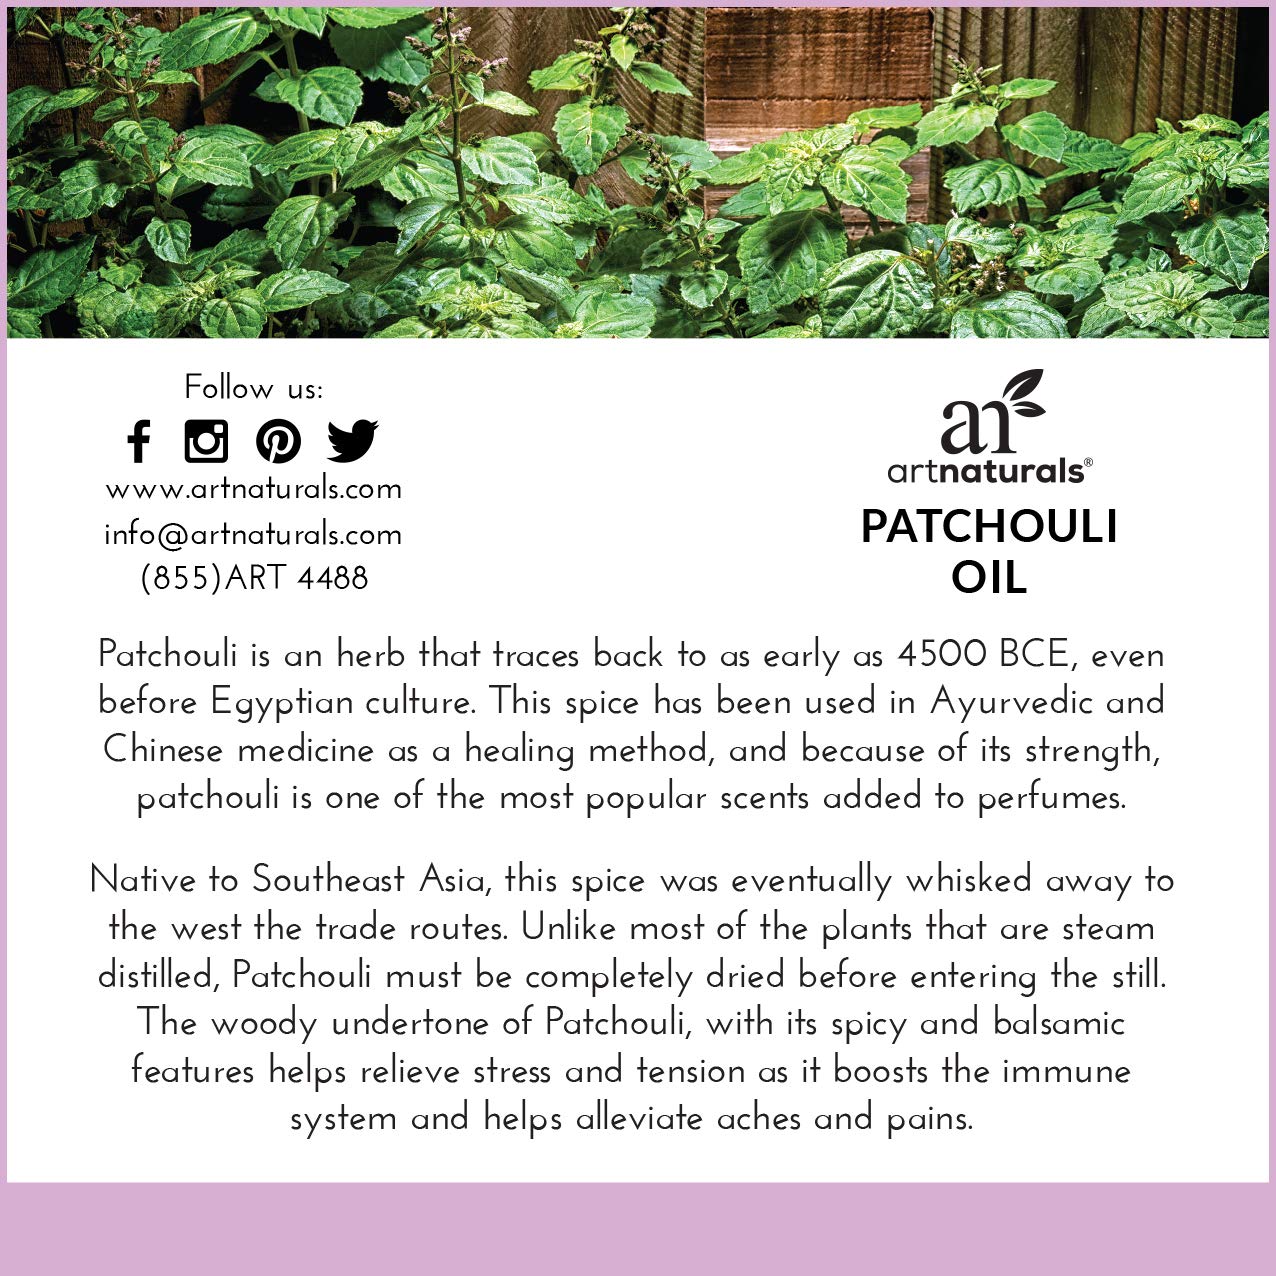 artnaturals 100% Pure Patchouli Essential Oil - (.5 Fl Oz / 15ml) - Undilued Therapeutic Grade Fragrance Oil - Soothe Balance and Comfort - for Diffuser, Skin, Body and Perfume